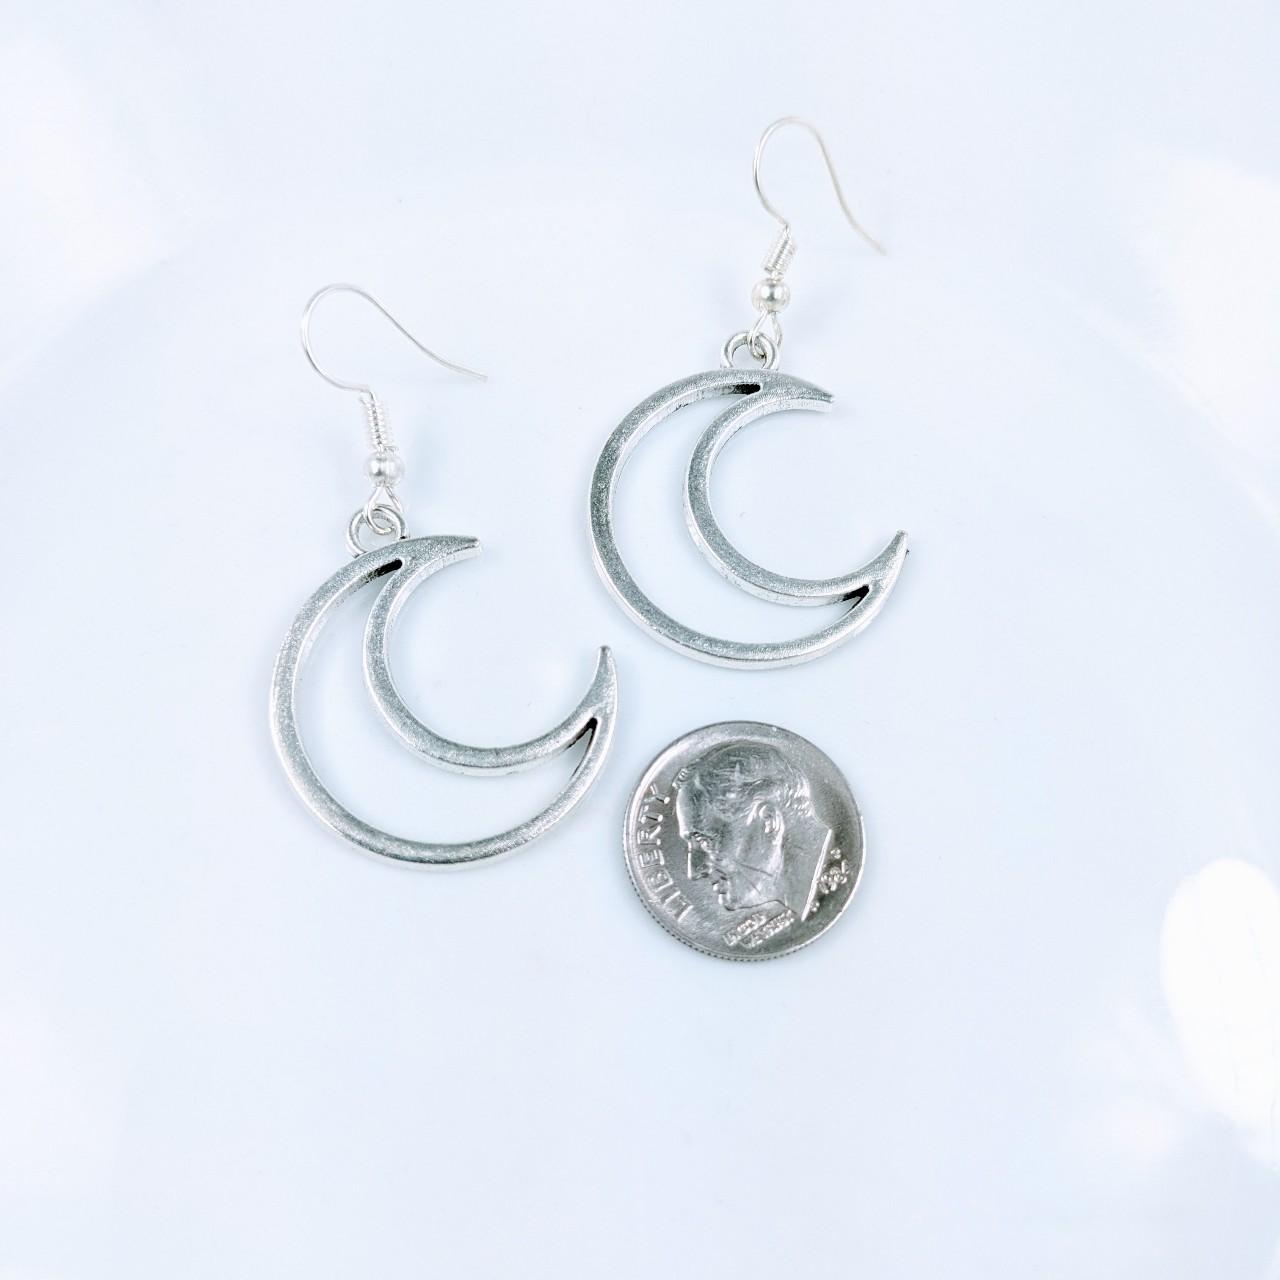 Product Image 3 - Crescent Moon Earrings
Brand new. 

Made